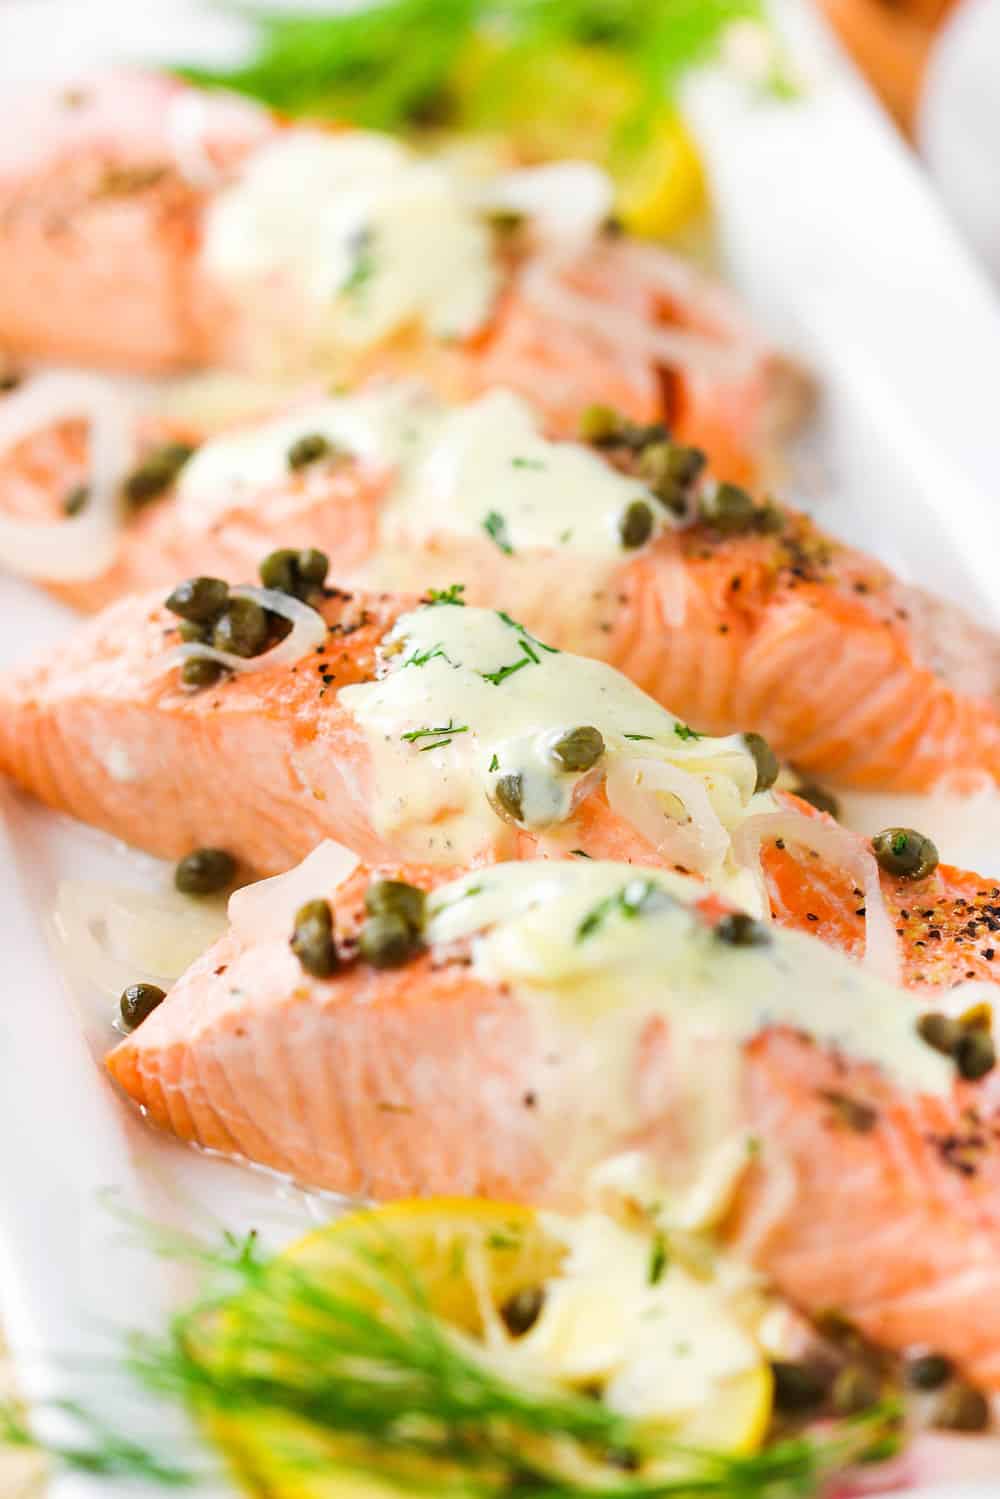 Poached salmon with capers and hollandaise sauce on a white platter